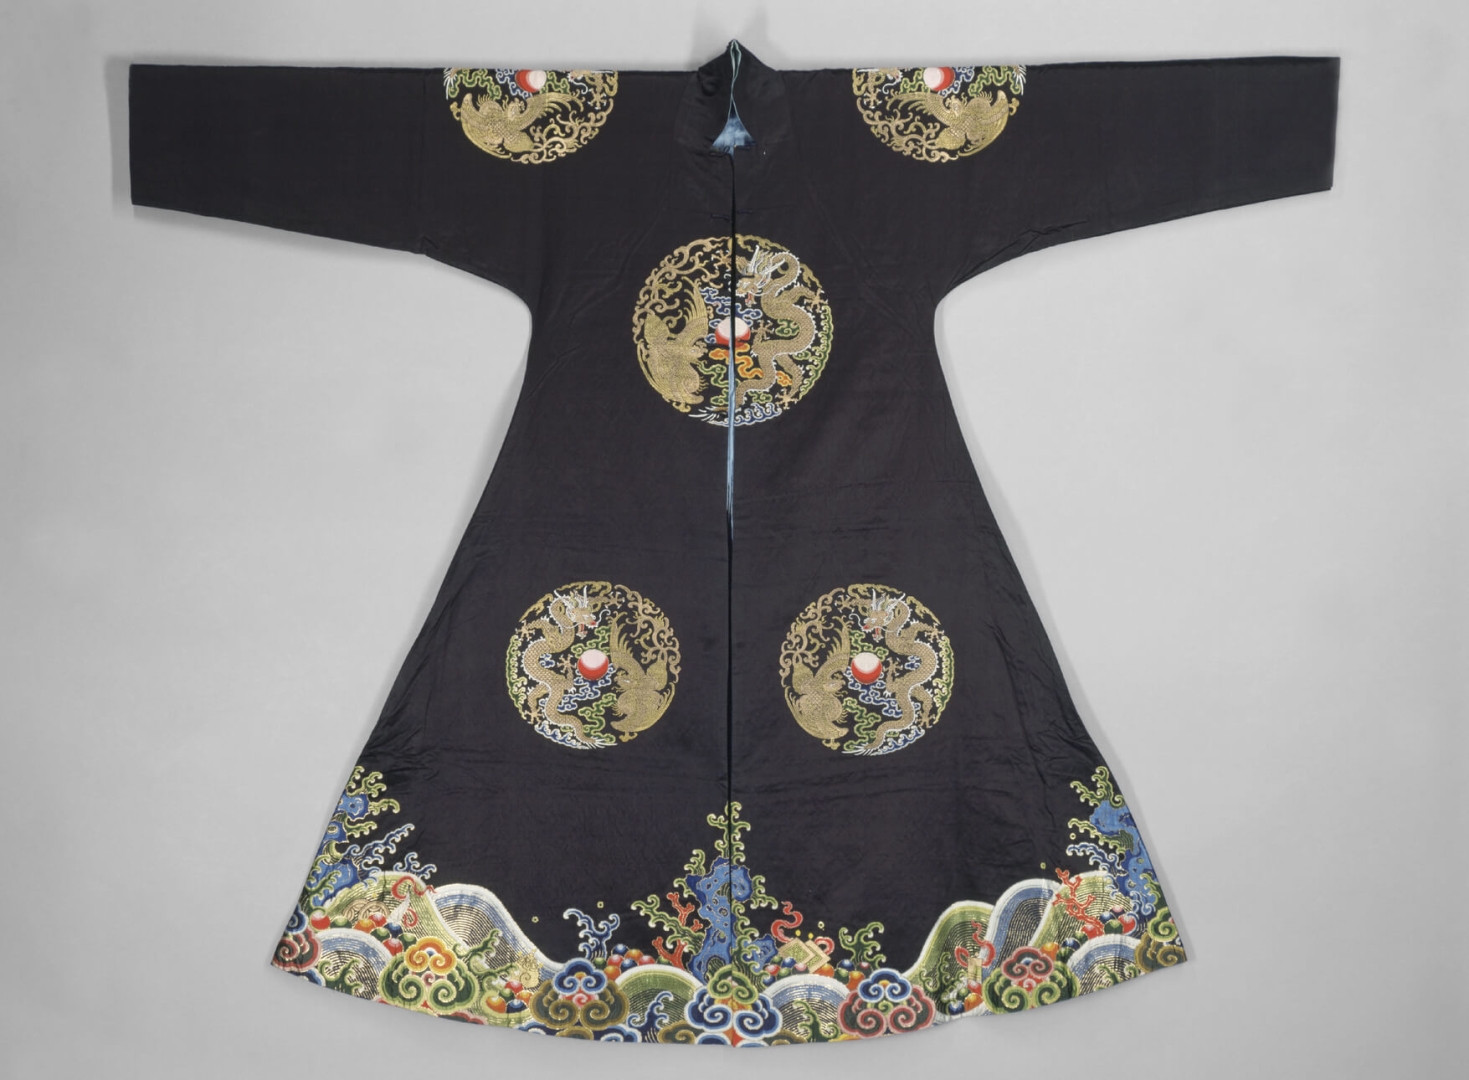 Dark Blue Brocaded Satin Surcoat with <br />
Eight Dragon with Phoenix Roundels